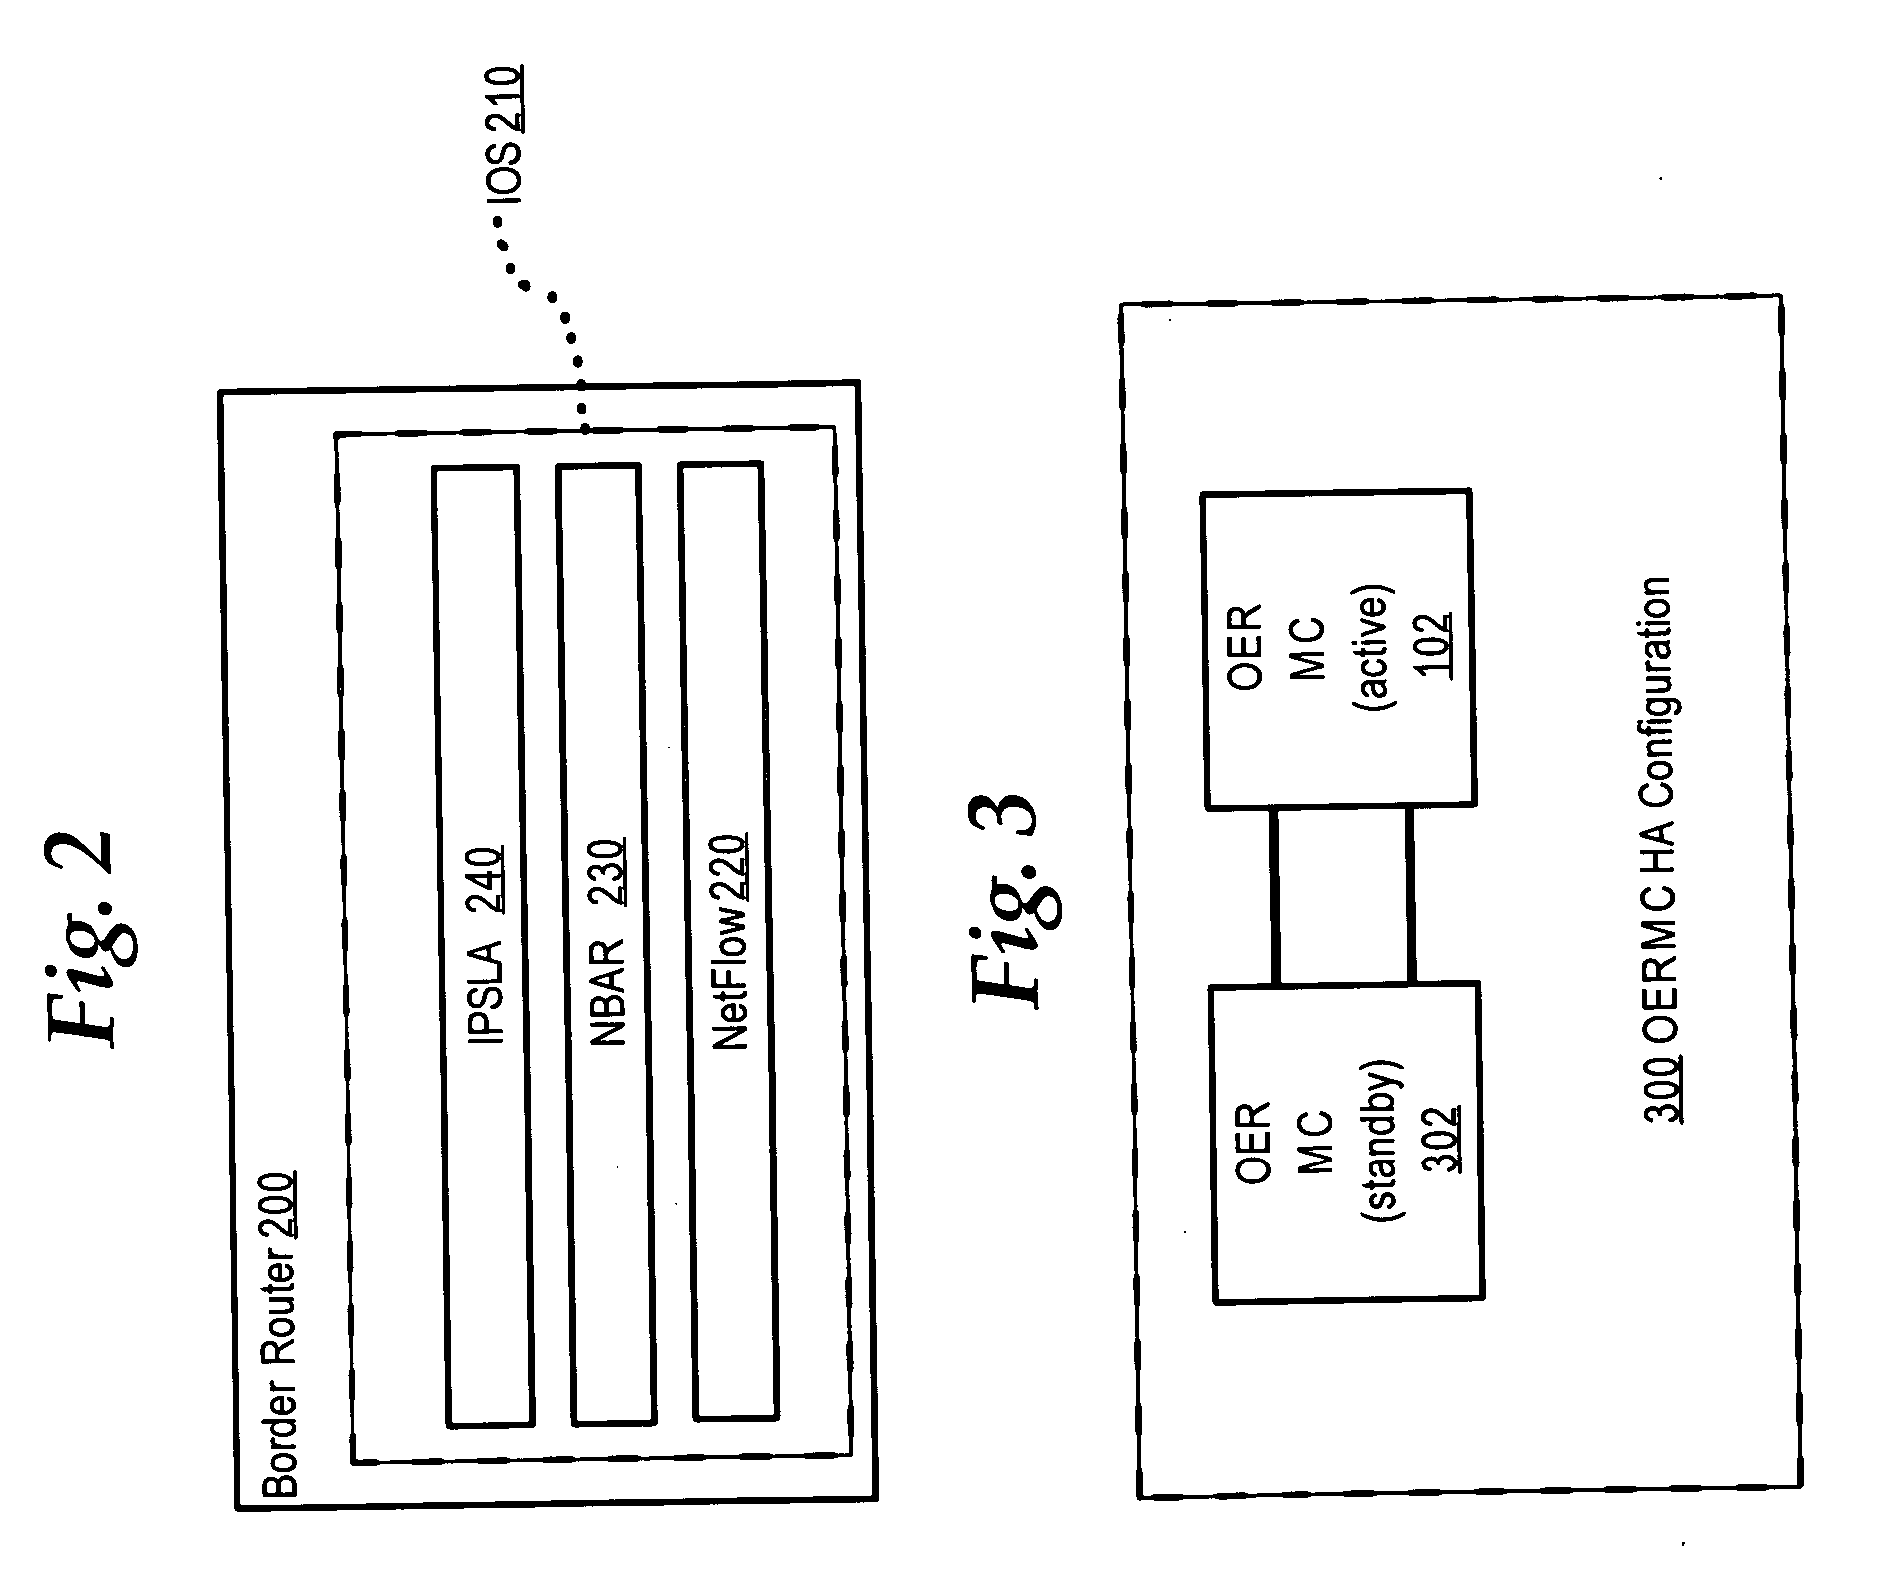 Method and apparatus for updating best path based on real-time congestion feedback